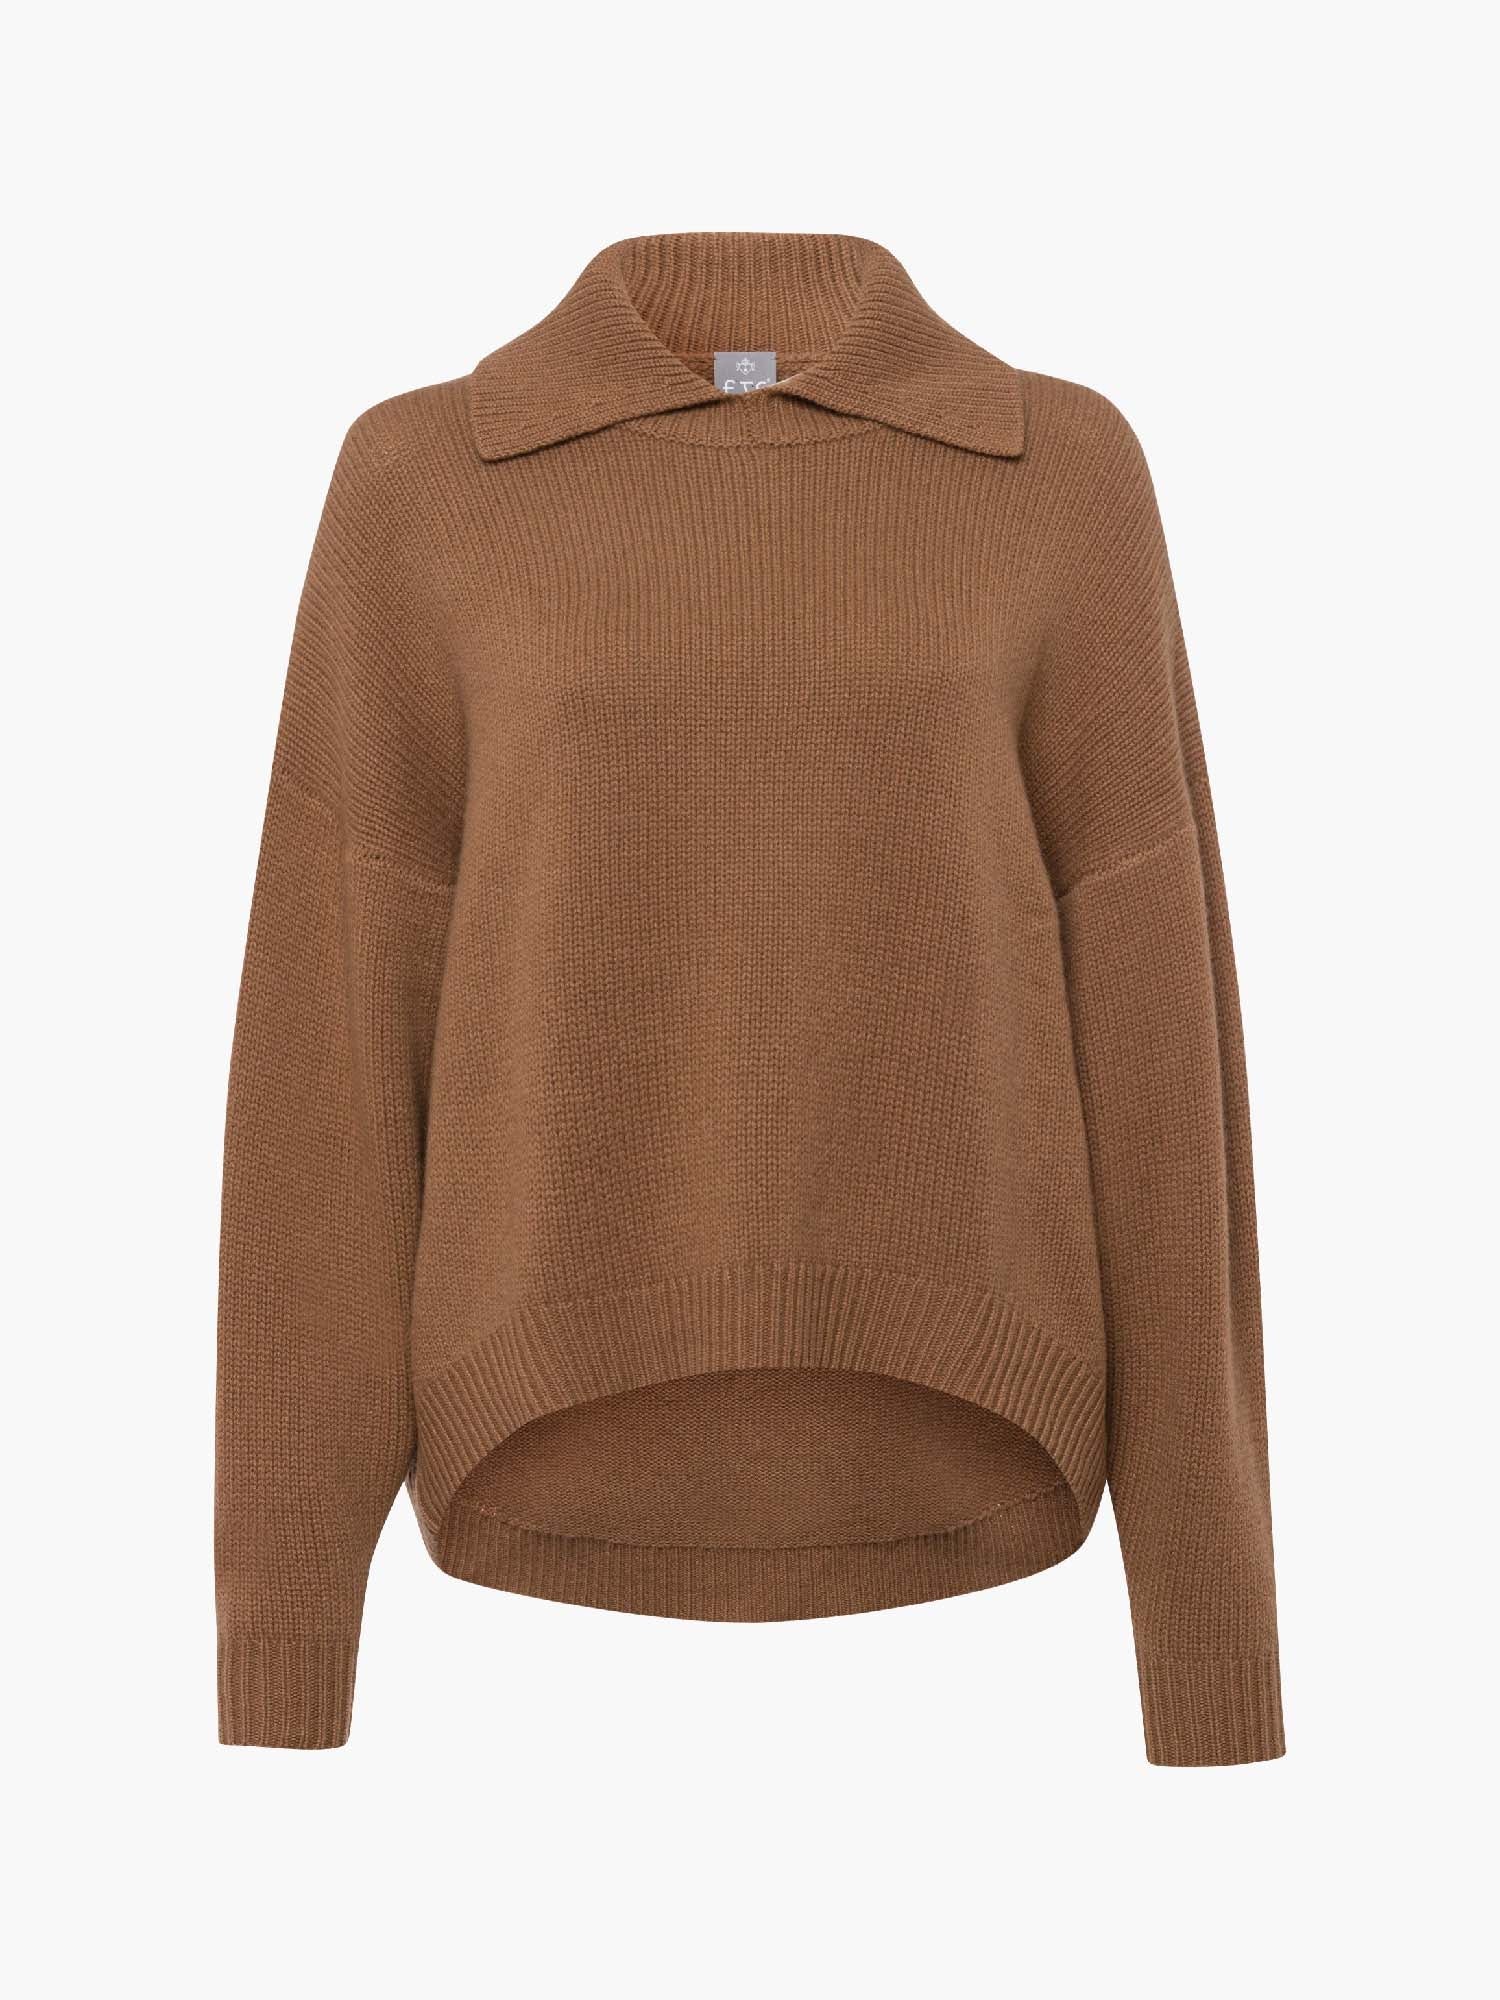 FTC-CASHMERE-OUTLET-SALE-Pullover Polo 100% Cashmere-Strick-XS-Roasted Almond-MUNICH_VILLAGE-by-ARCHIVIST